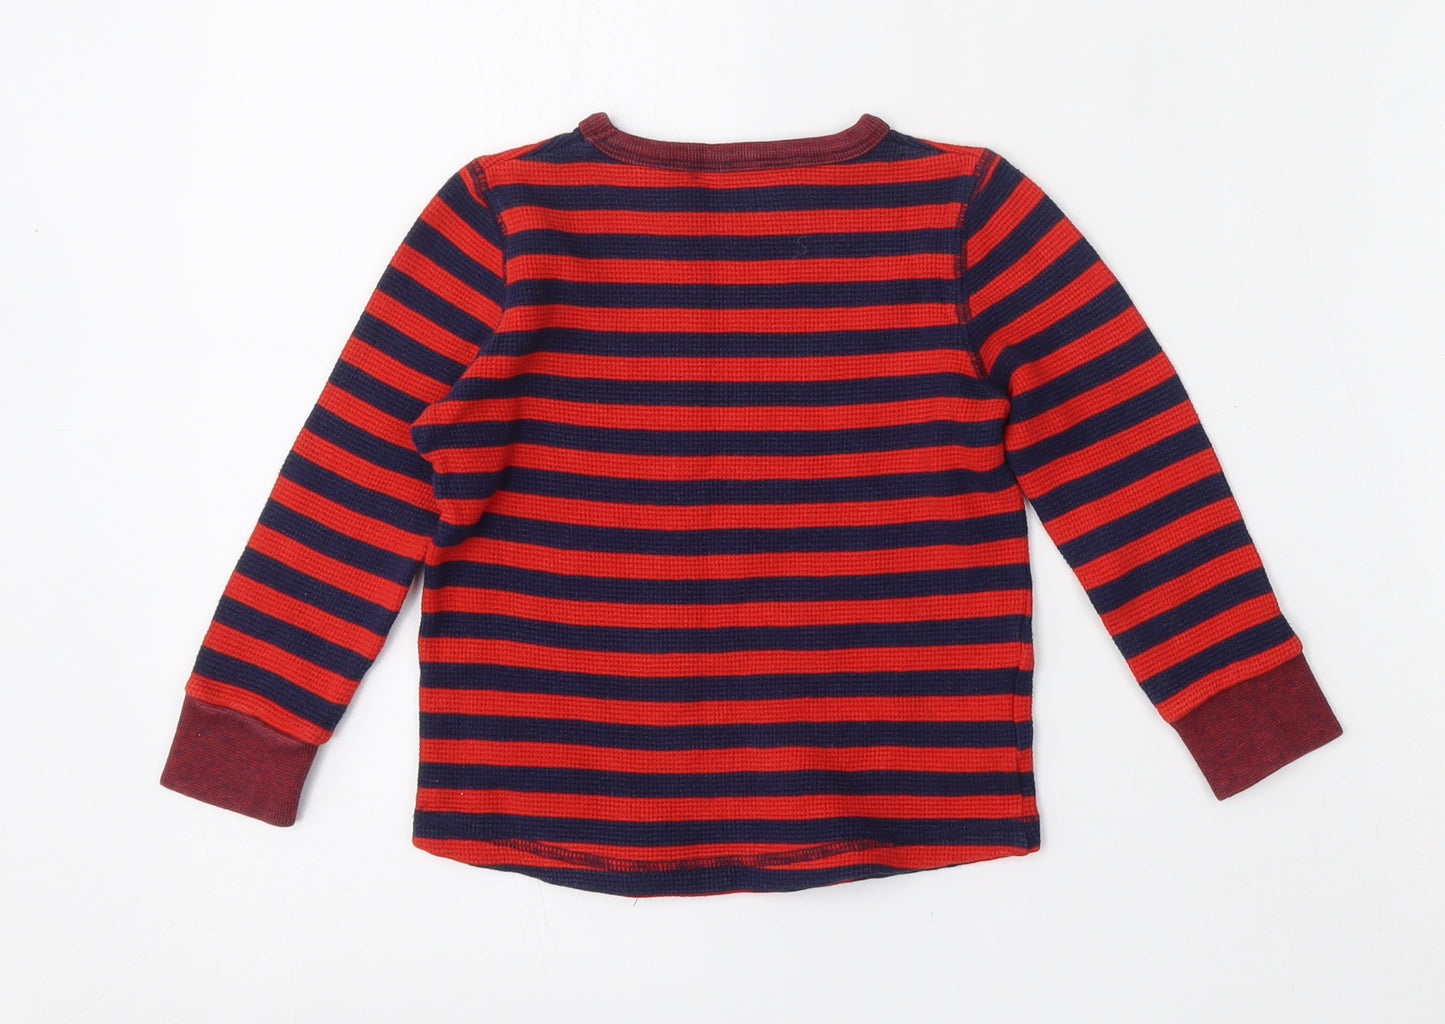 Country Road Boys Multicoloured Round Neck Striped Cotton Pullover Jumper Size 3 Years